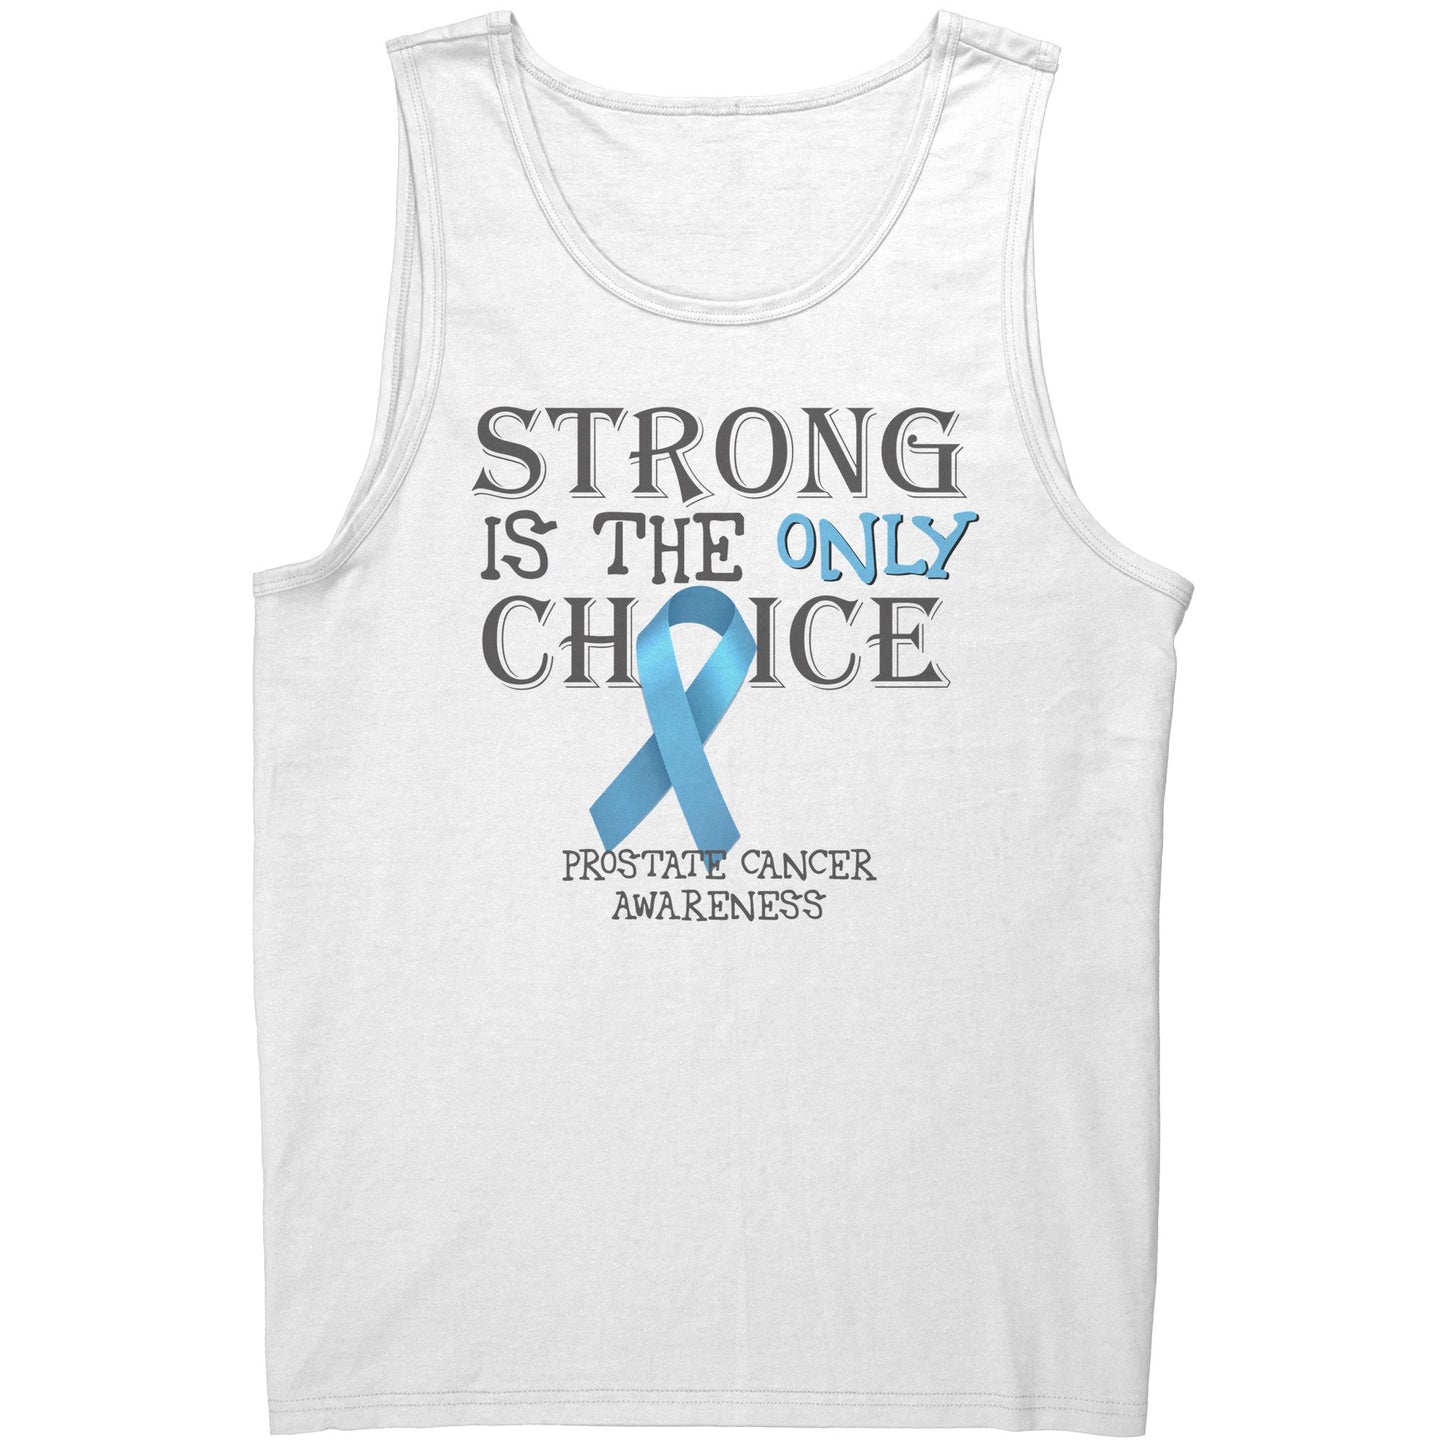 Strong is the Only Choice -Prostate Cancer Awareness T-Shirt, Hoodie, Tank |x|